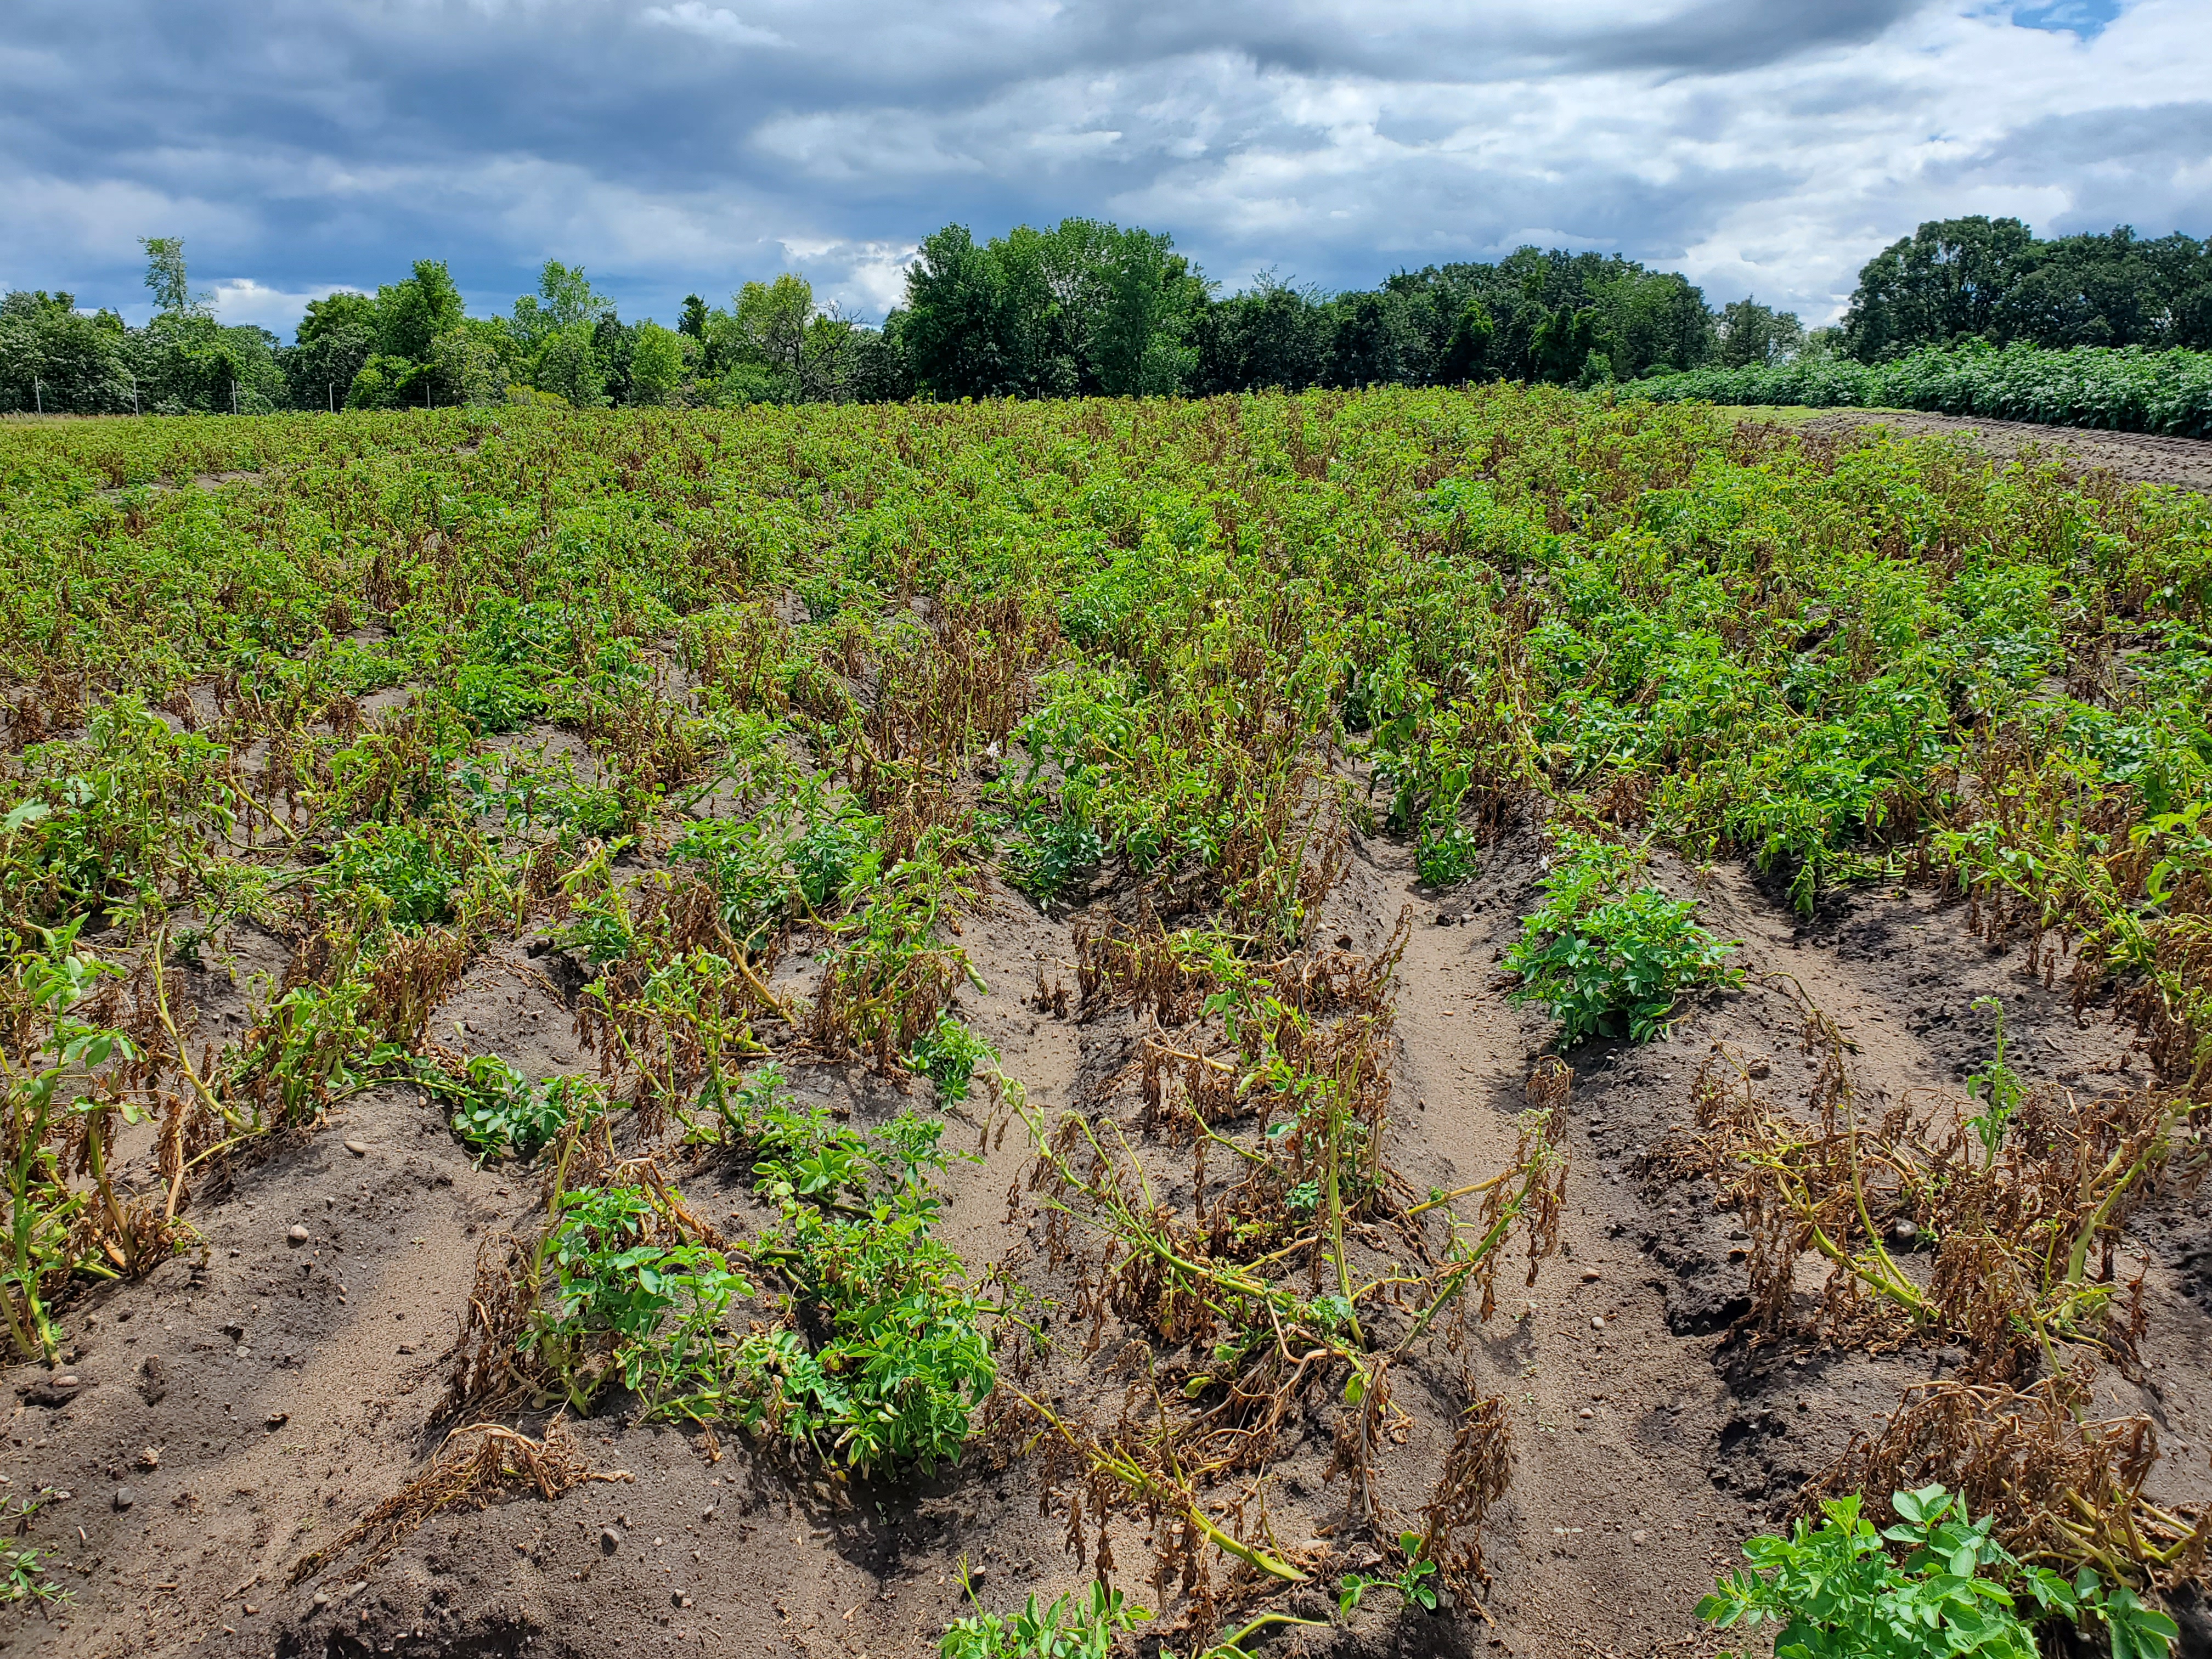 field of potato plants, browned and dying from verticillium wilt